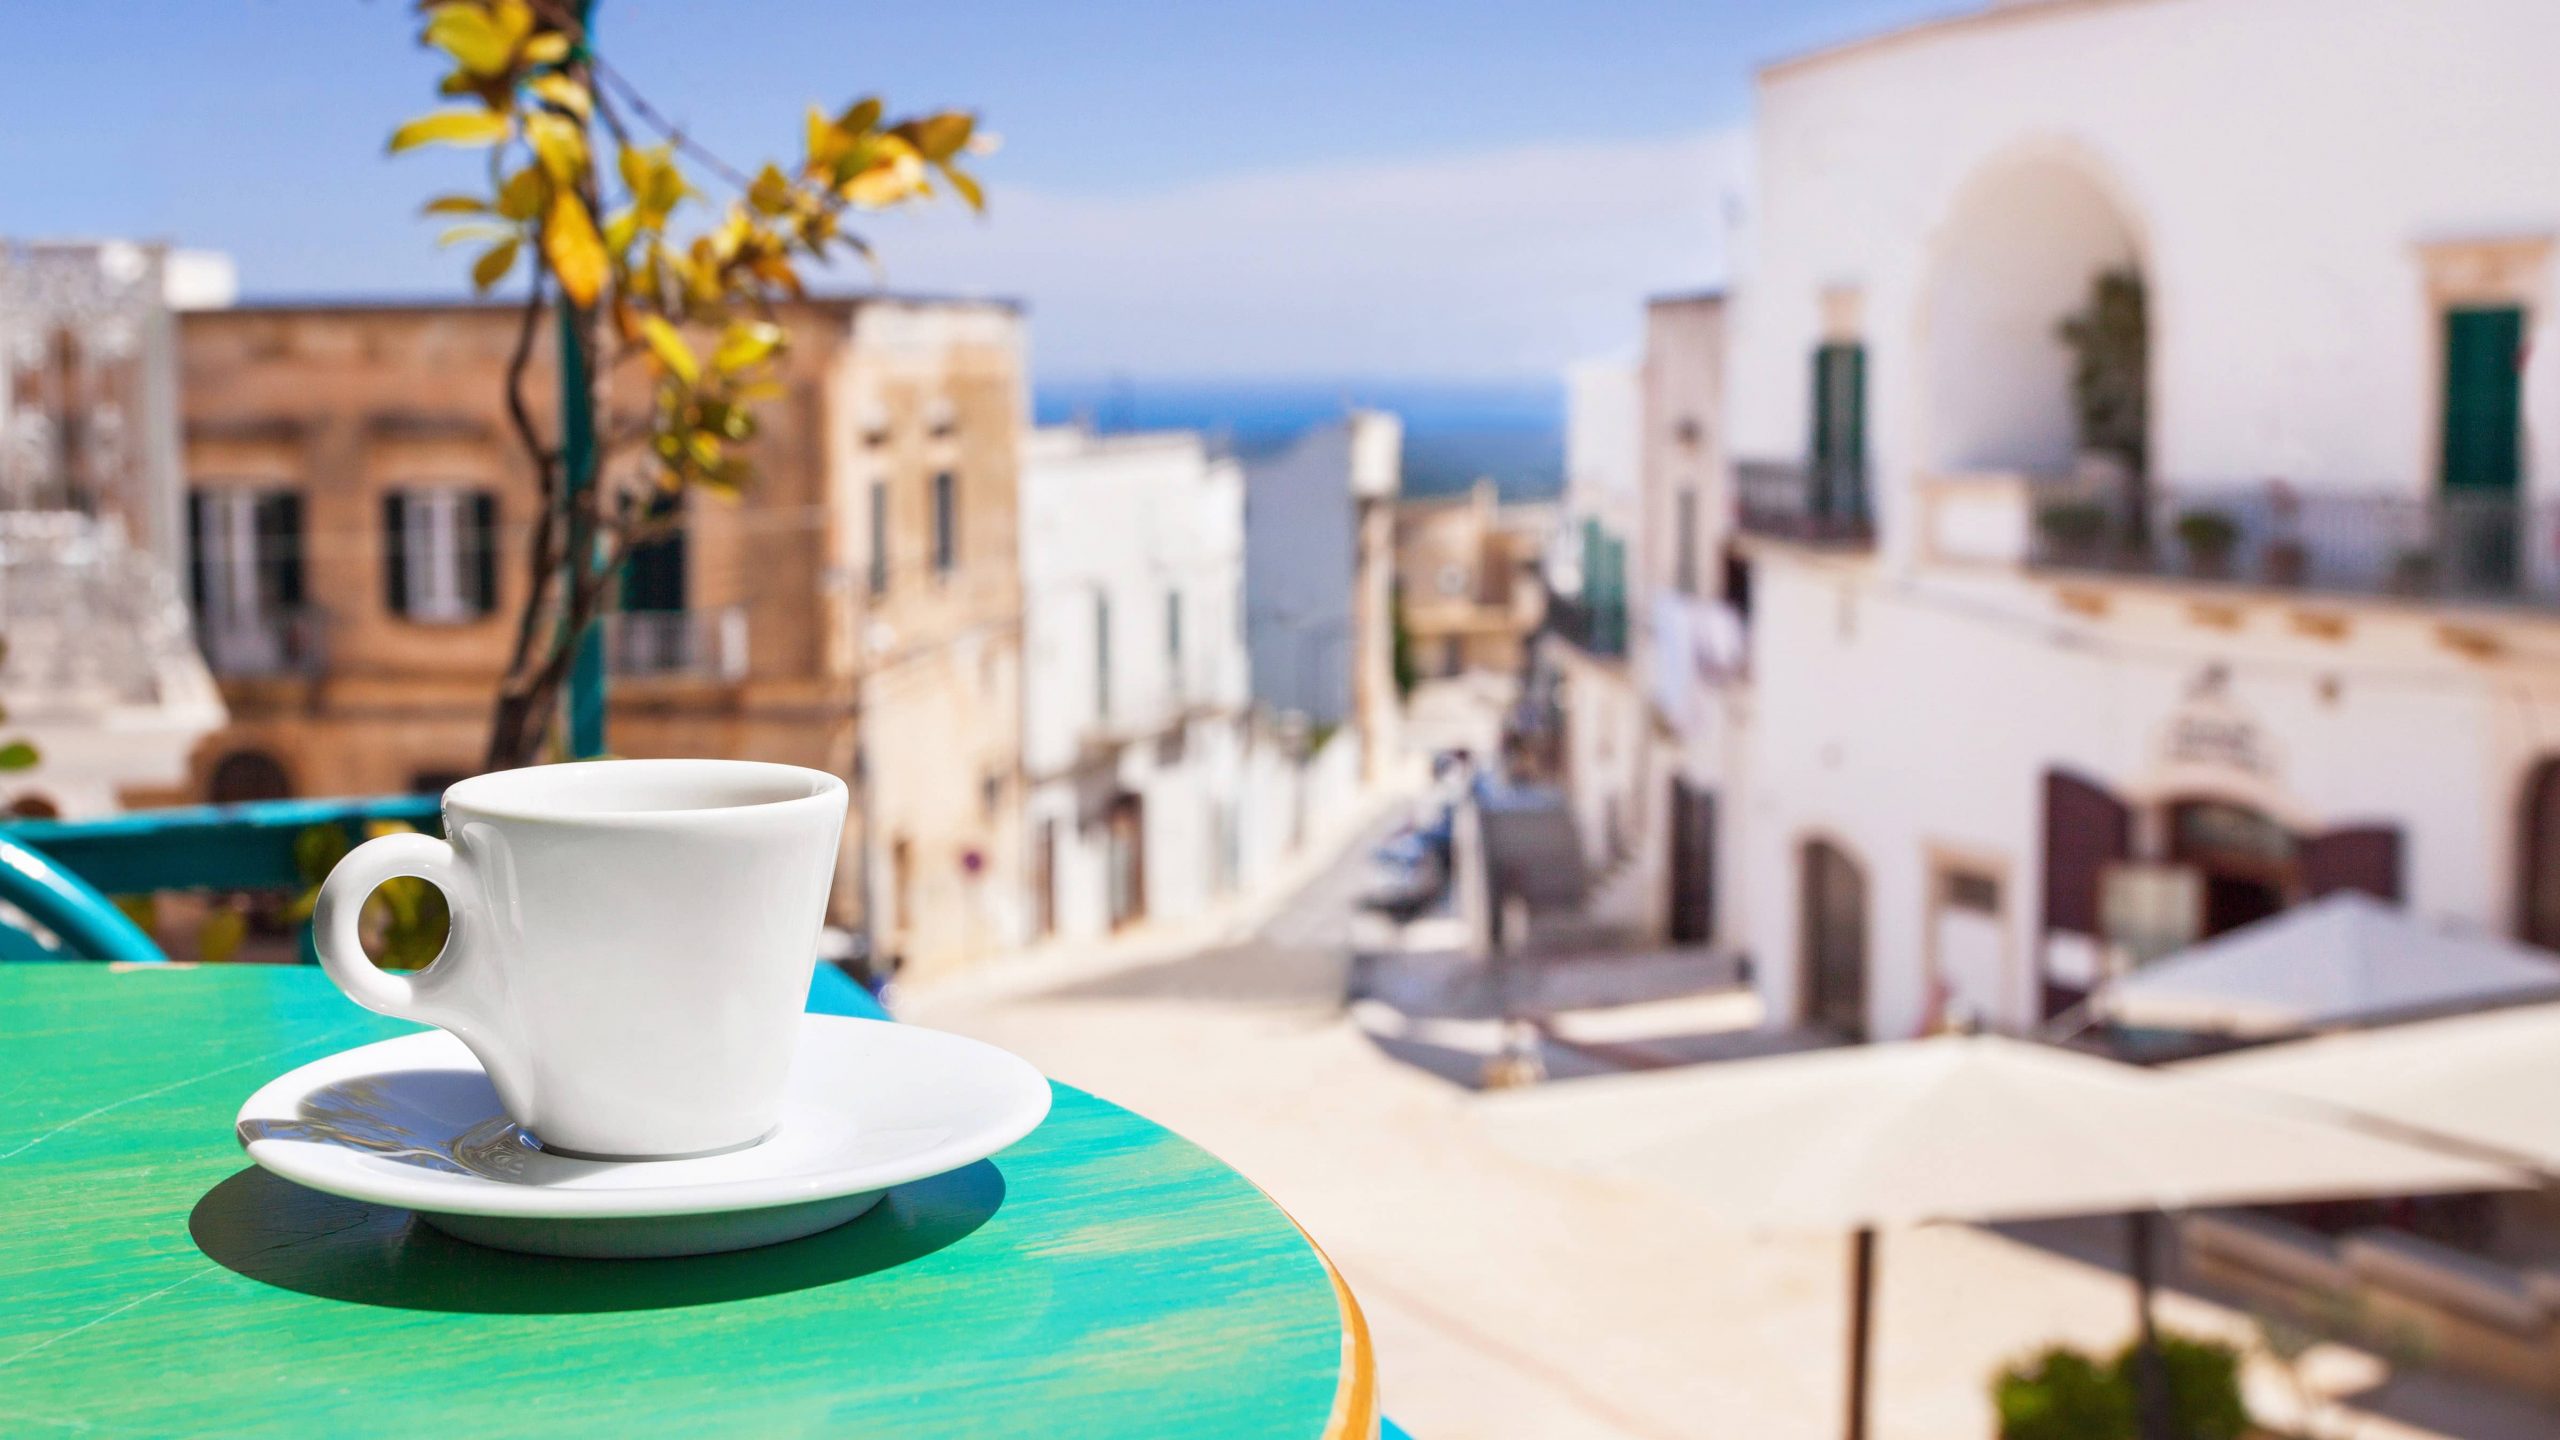 Cup of coffee in Italy